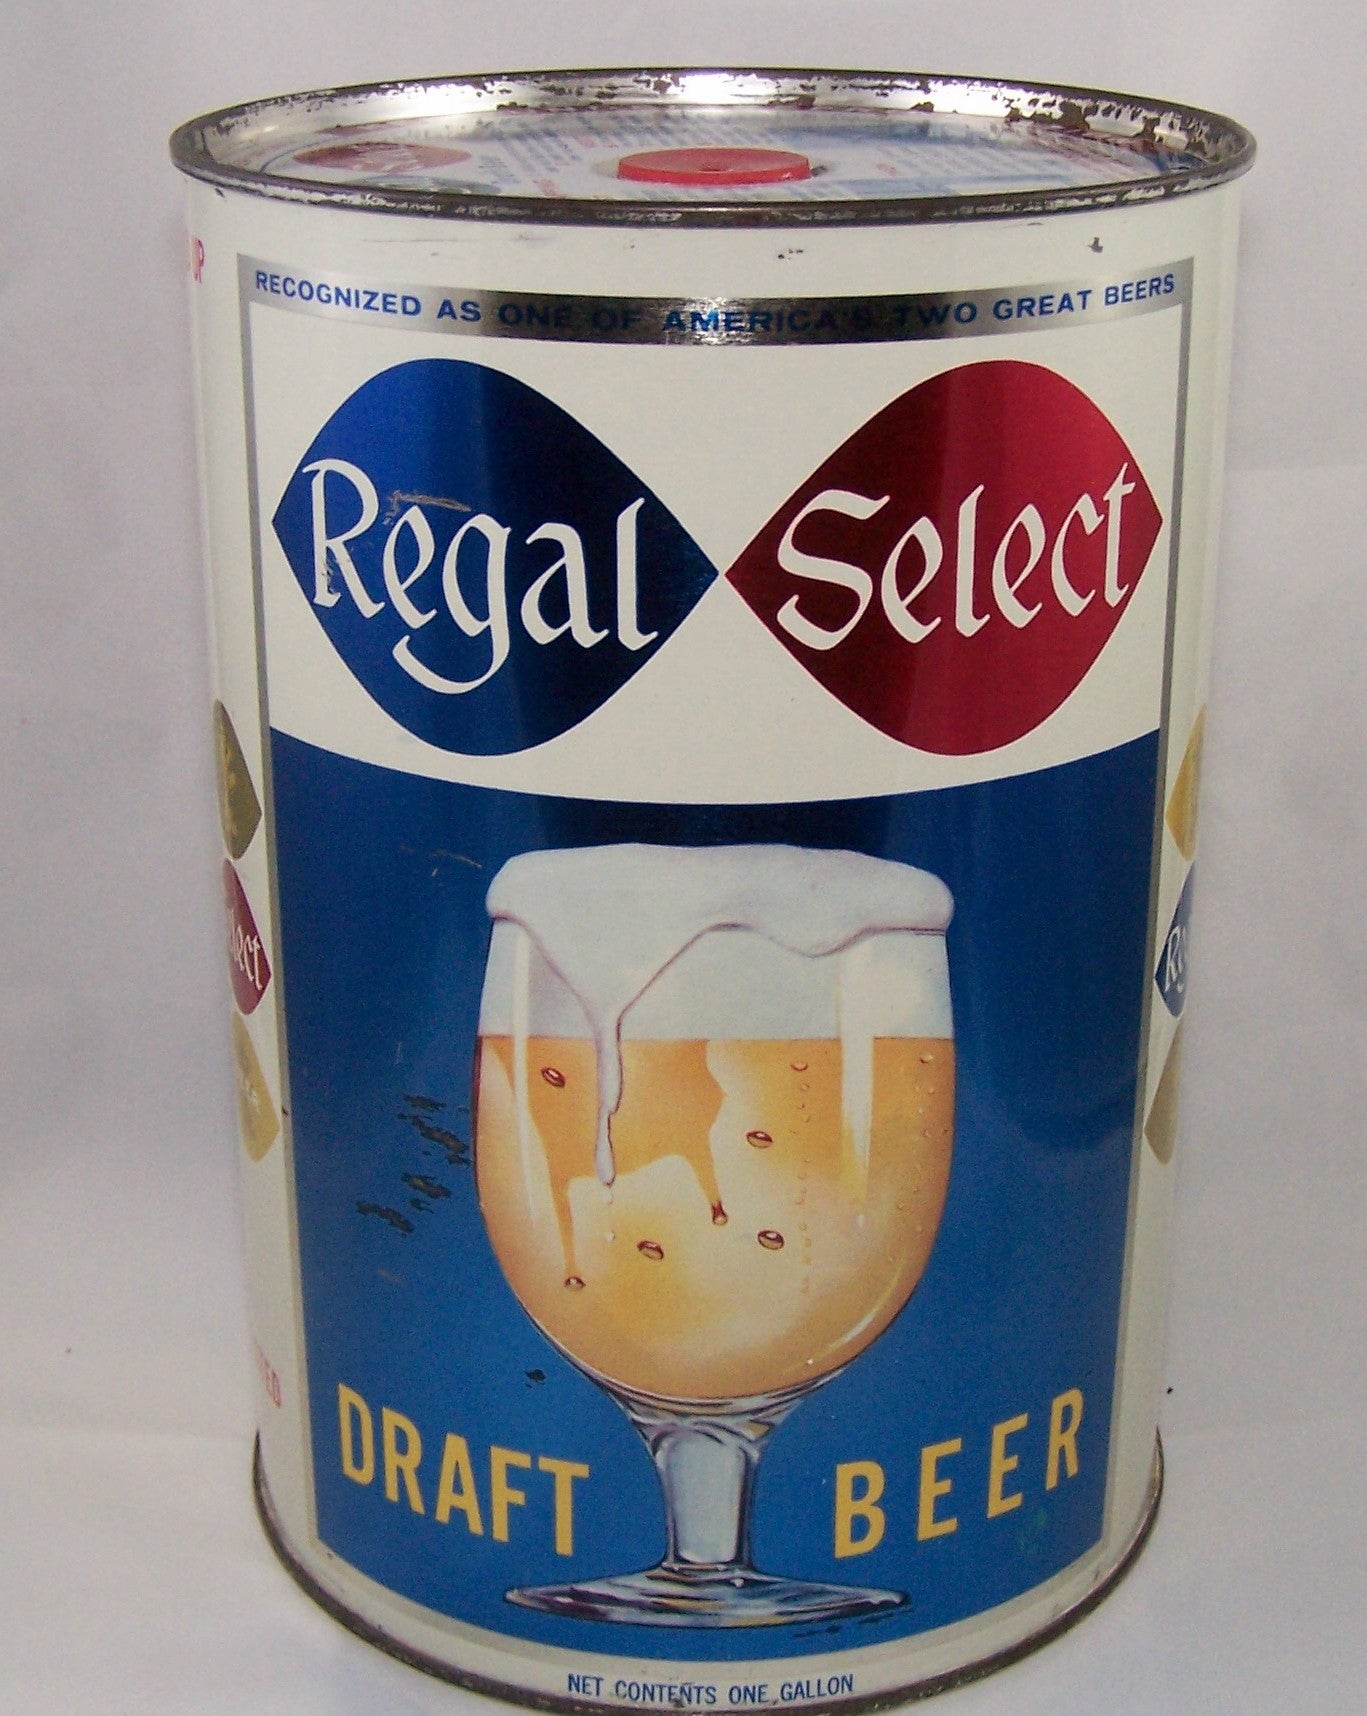 Regal Select Draft Beer, USBC 246-5, Grade 1 to 1/1+ Sold on 01/04/16